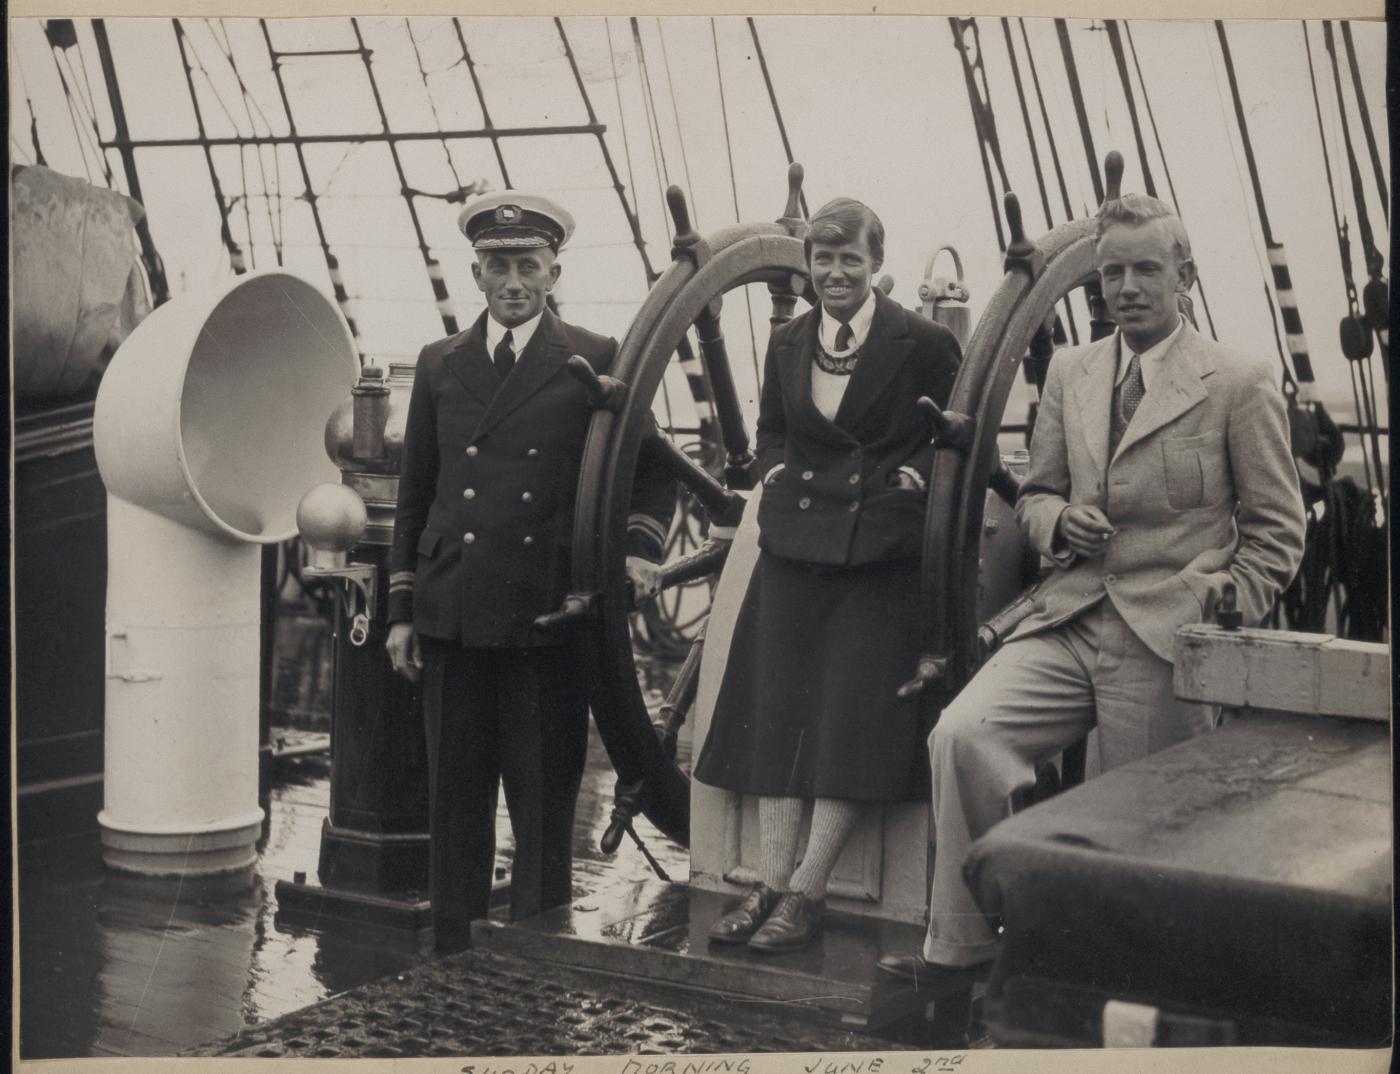 An image showing 'JOD 94_2 | Journals of Miss Winifred Lloyd aboard HERZOGIN CECILIE, S V VIKING AND OLIVEBANK January 1935 - May 1938'